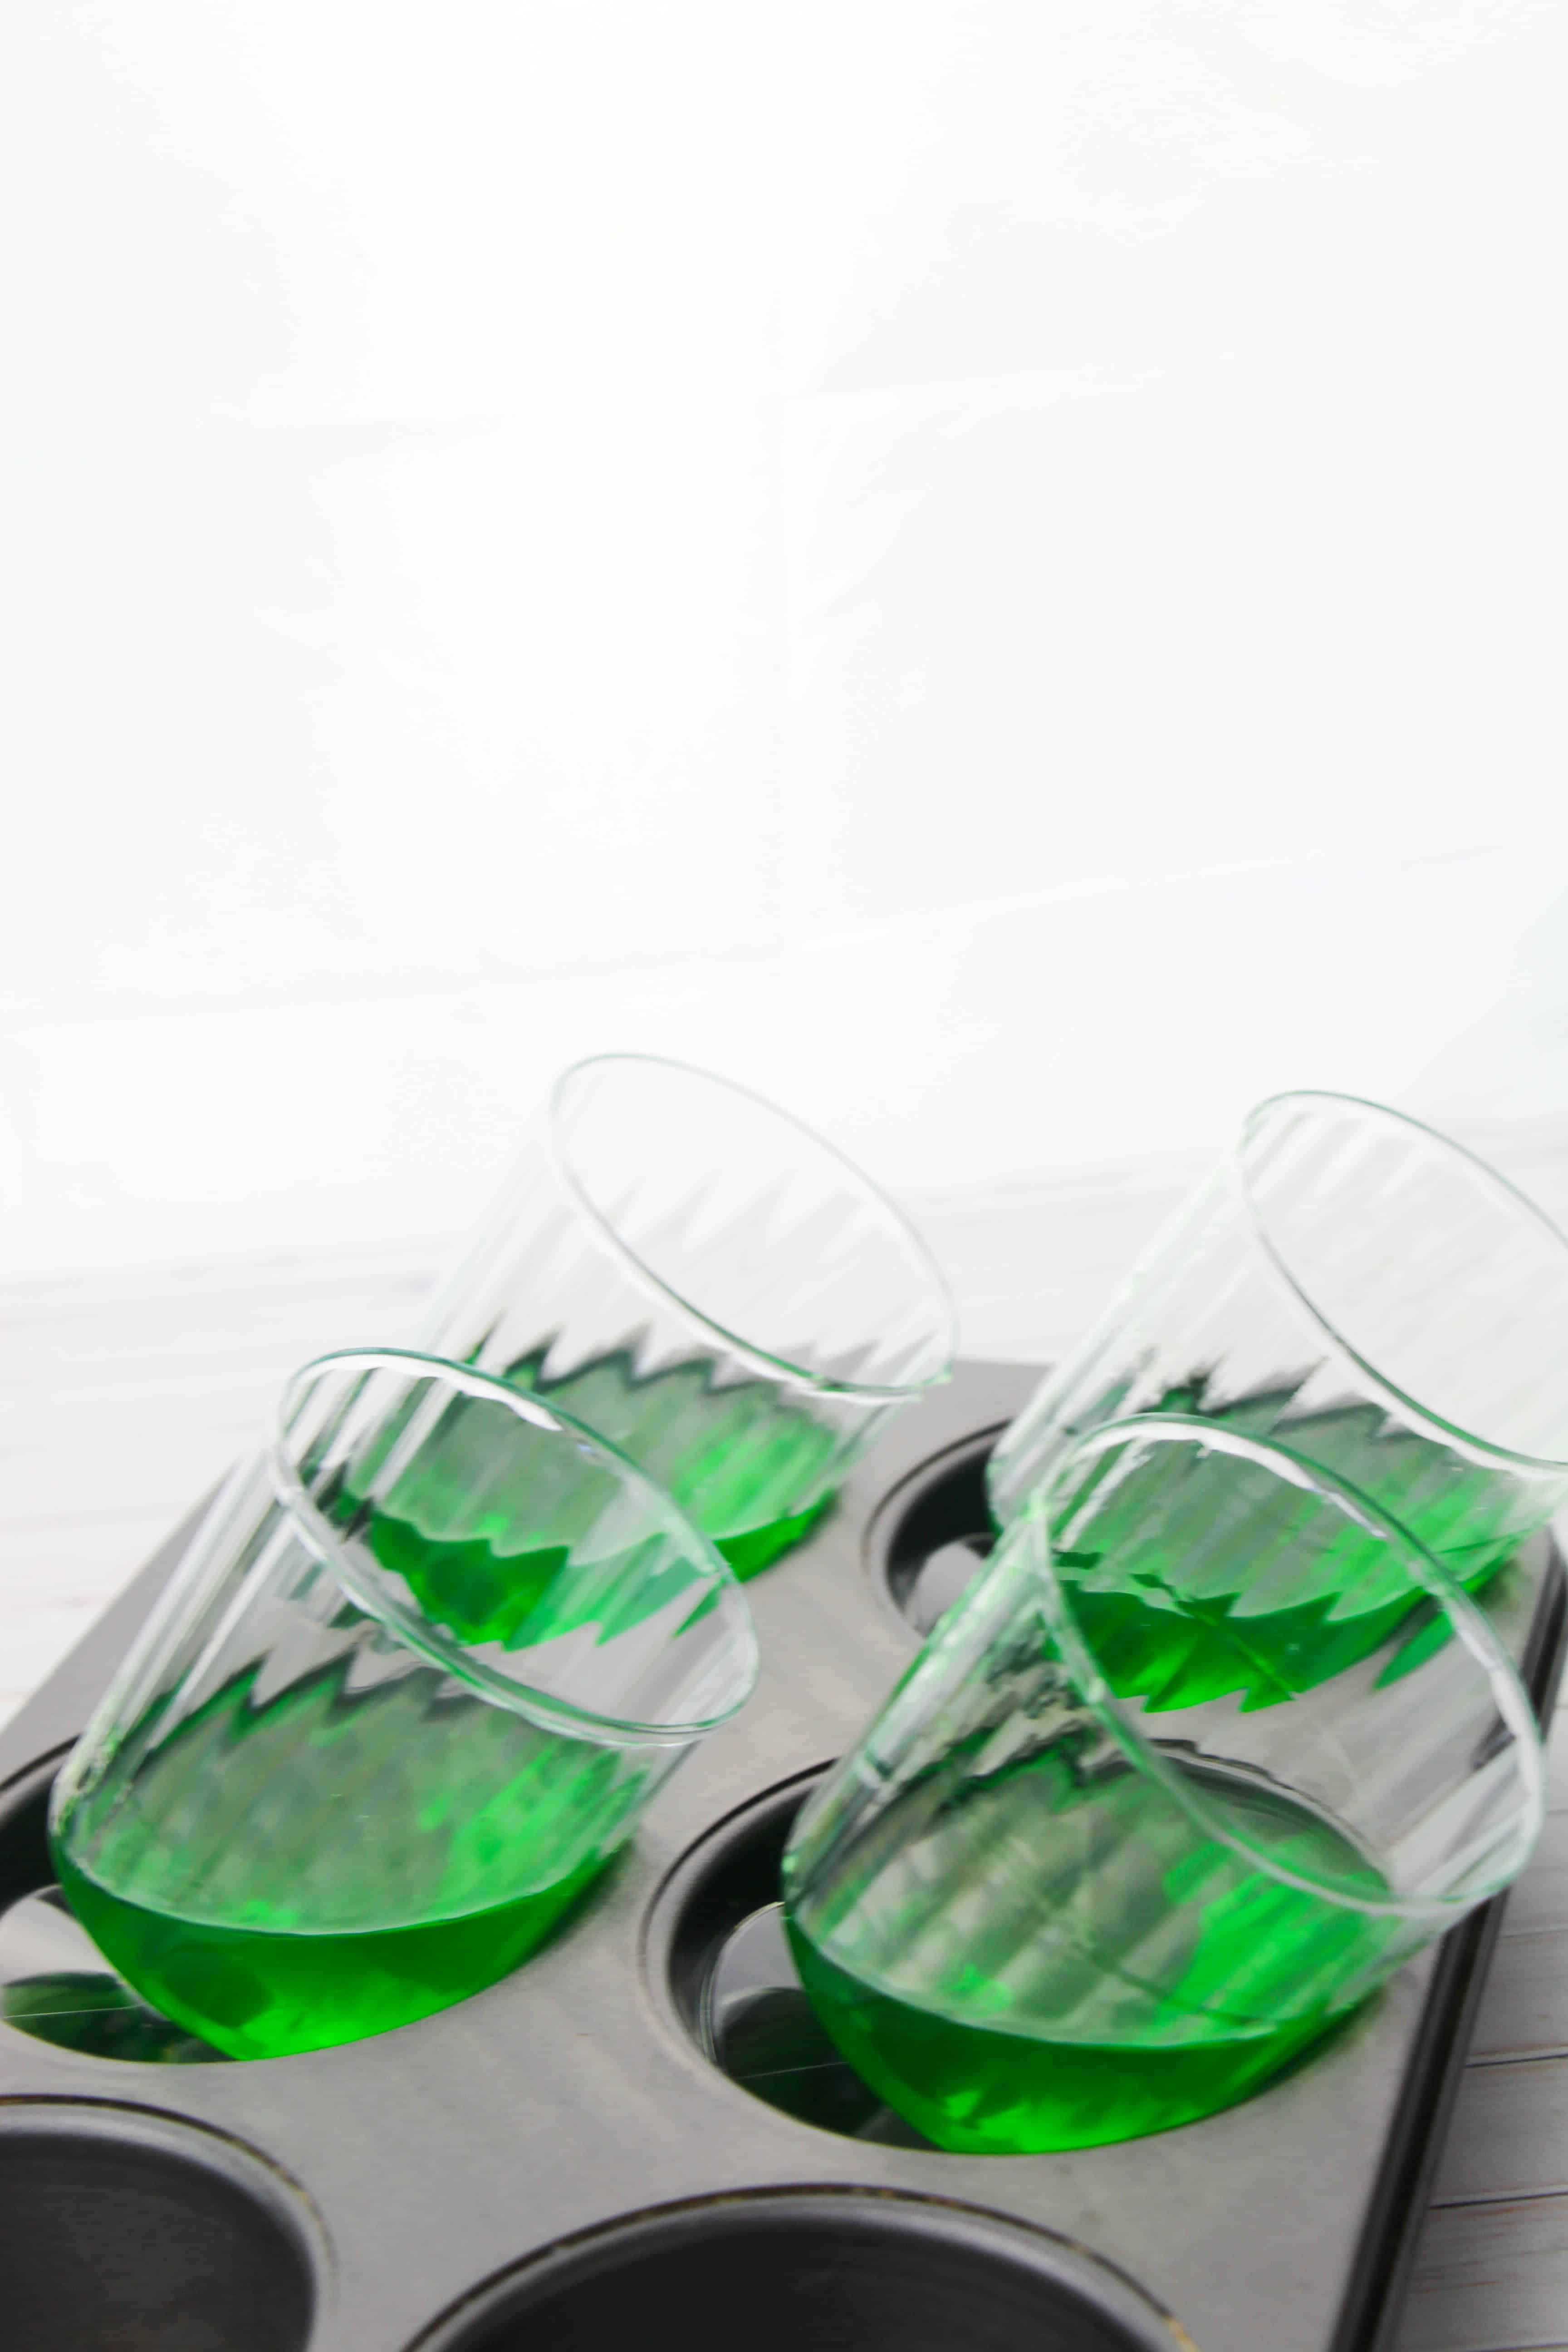 A photo of the glasses tipped to the side in a muffin pan with green jello setting up in them.